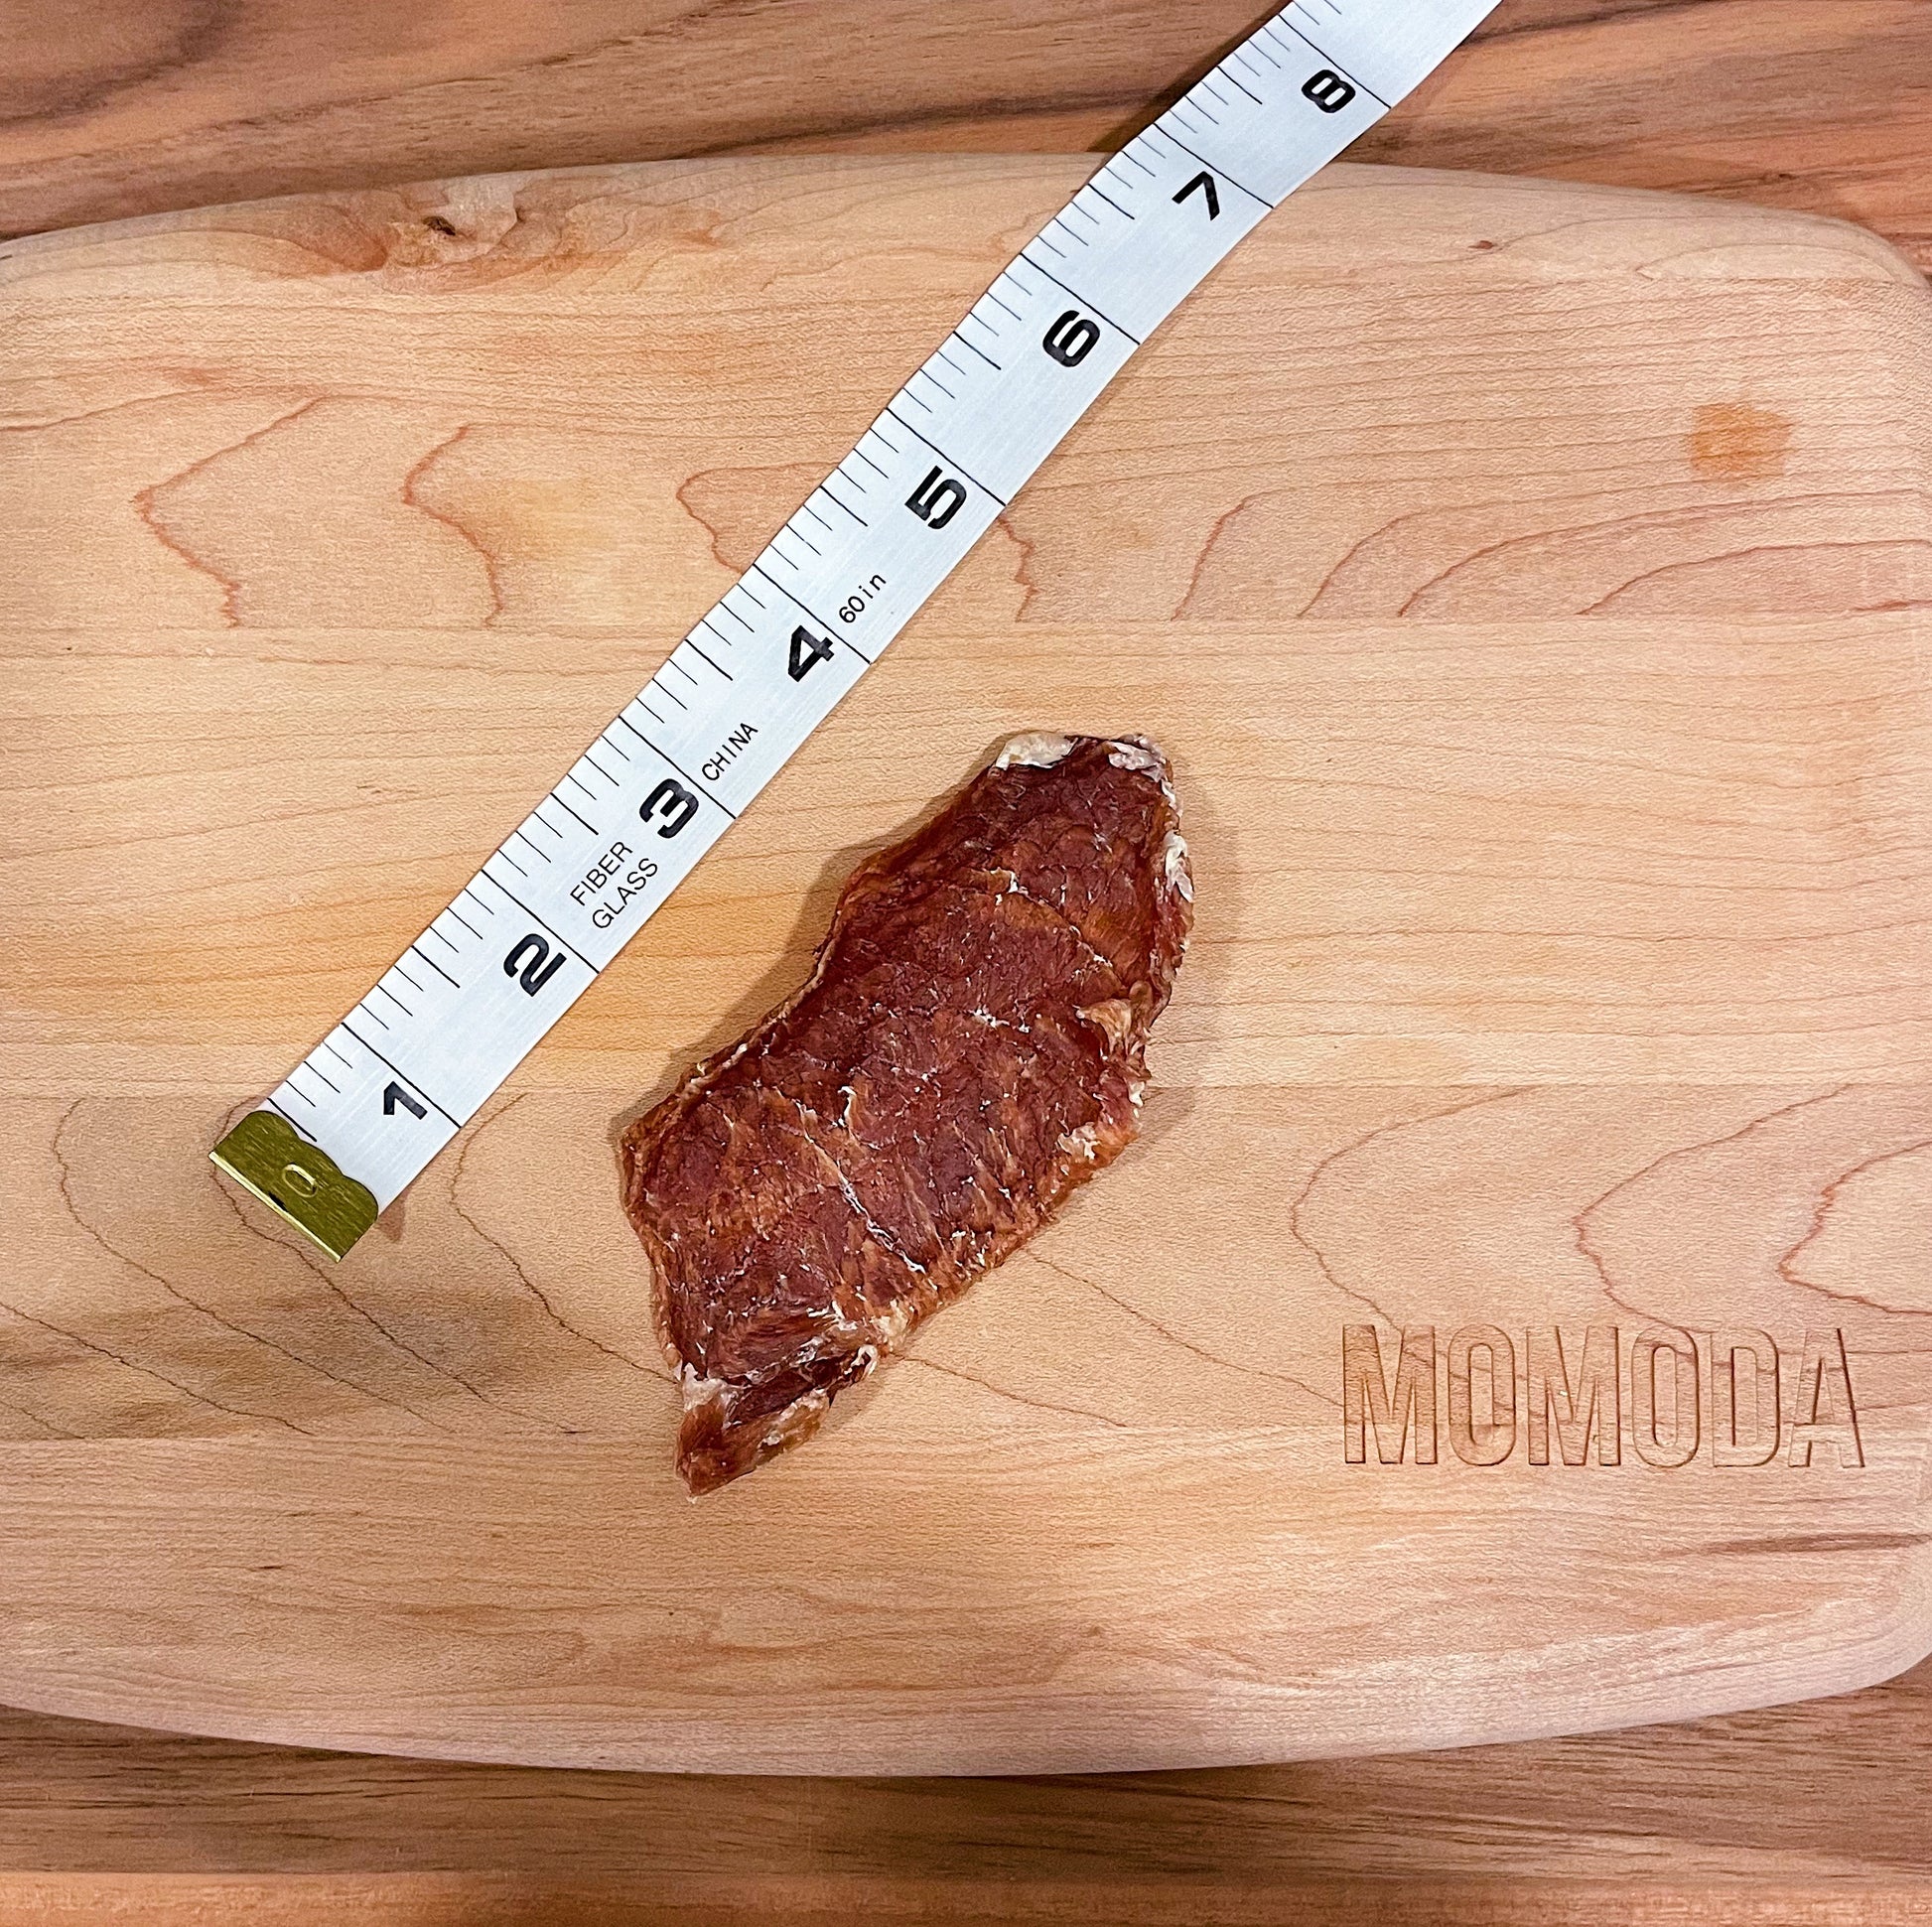 The size of each pork loin is between 4 to 5 inches.